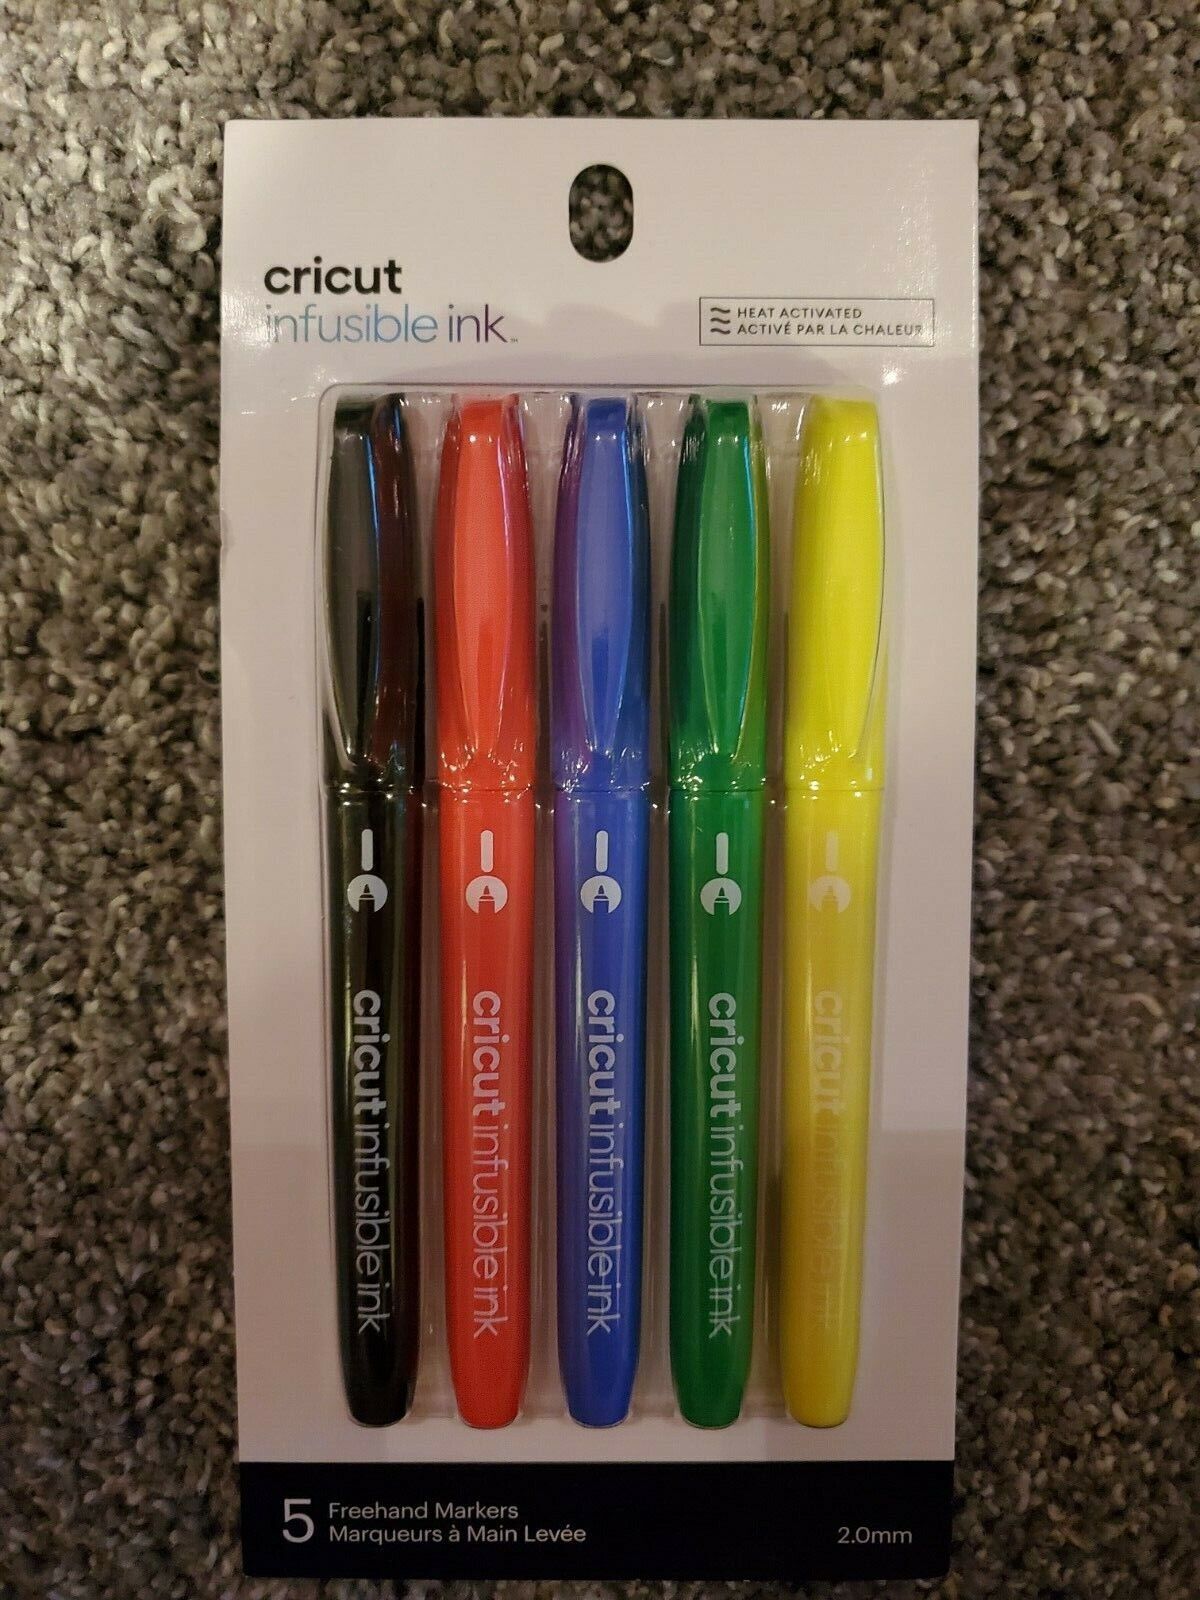 Cricut Infusible Ink Pens, Freehand Markers